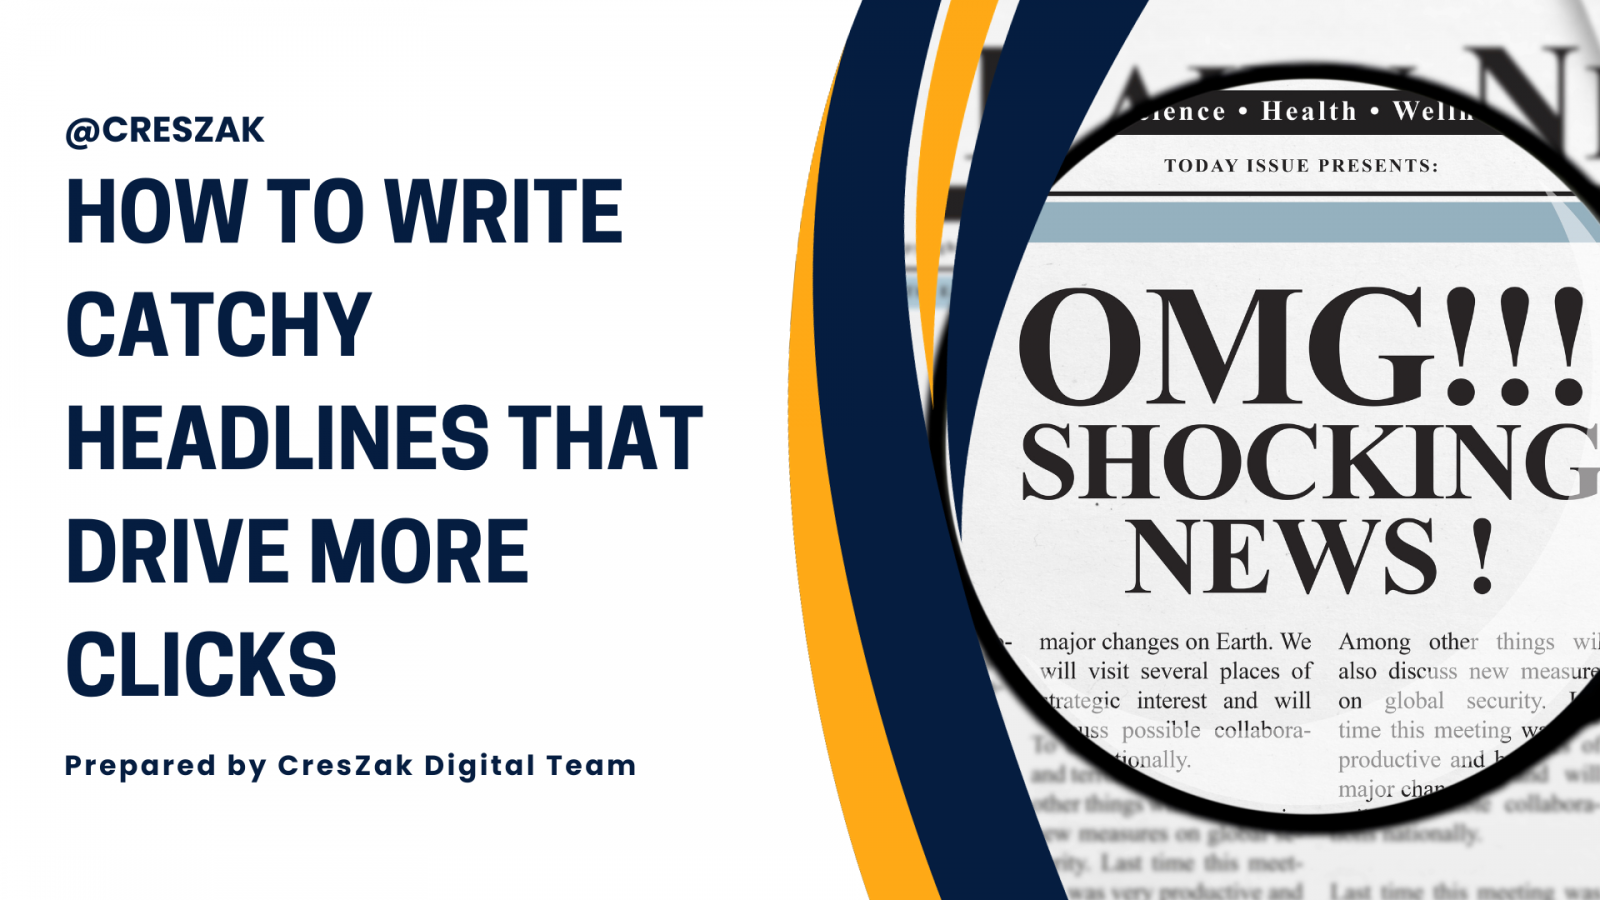 How to Write Catchy Headlines That Drive More Clicks: 10 Proven Tips